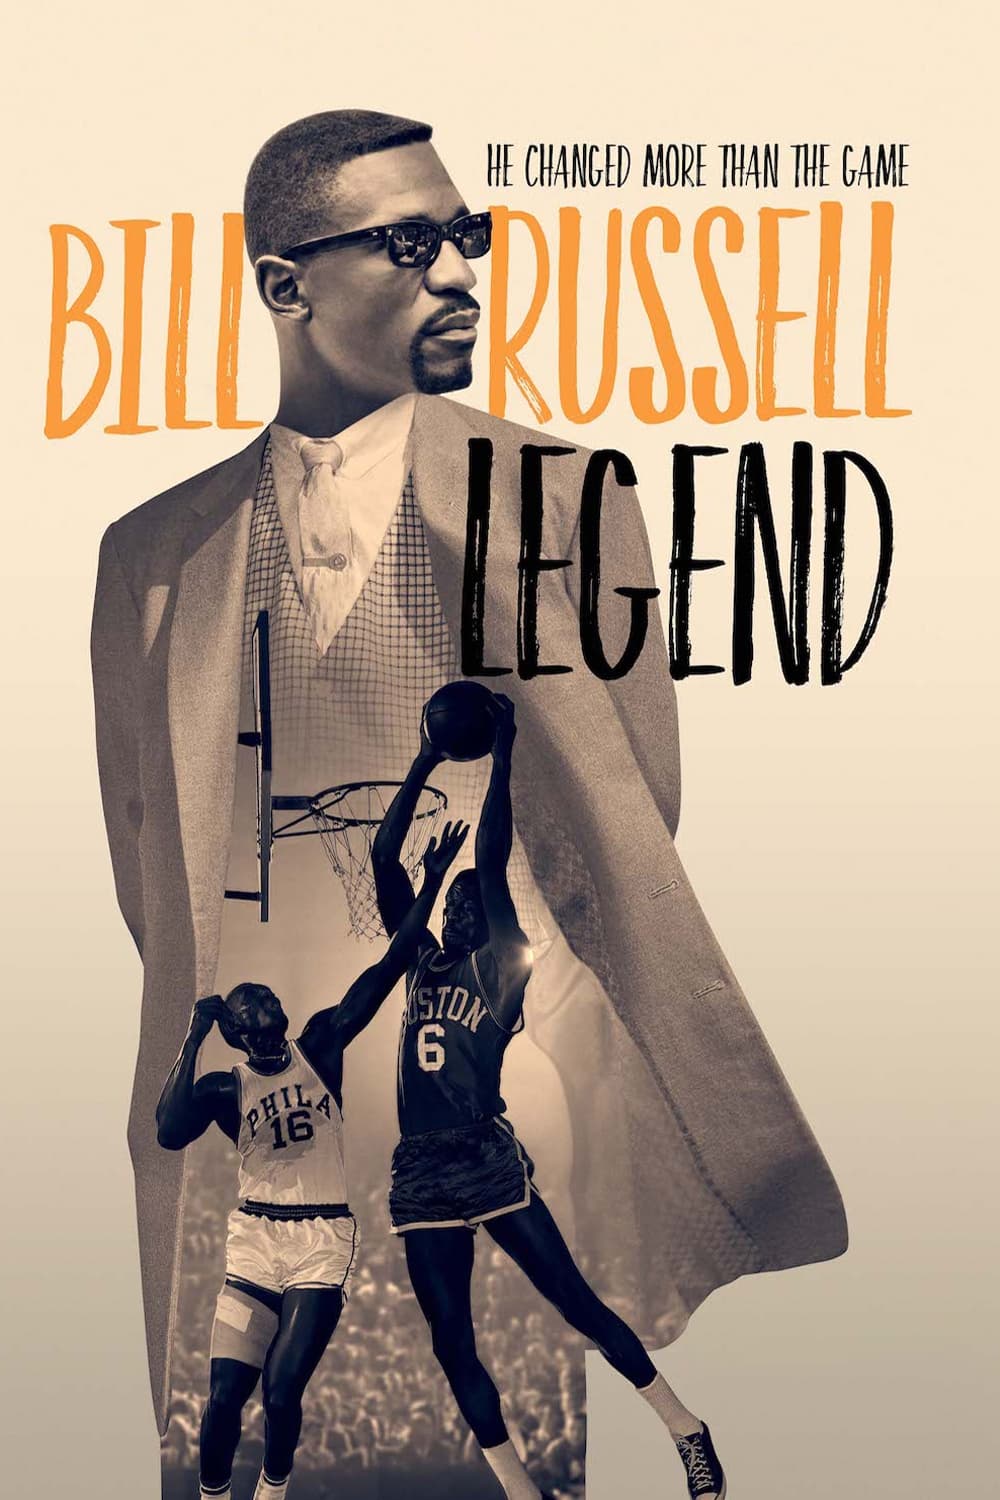 Bill Russell: Legend TV Shows About Louisiana